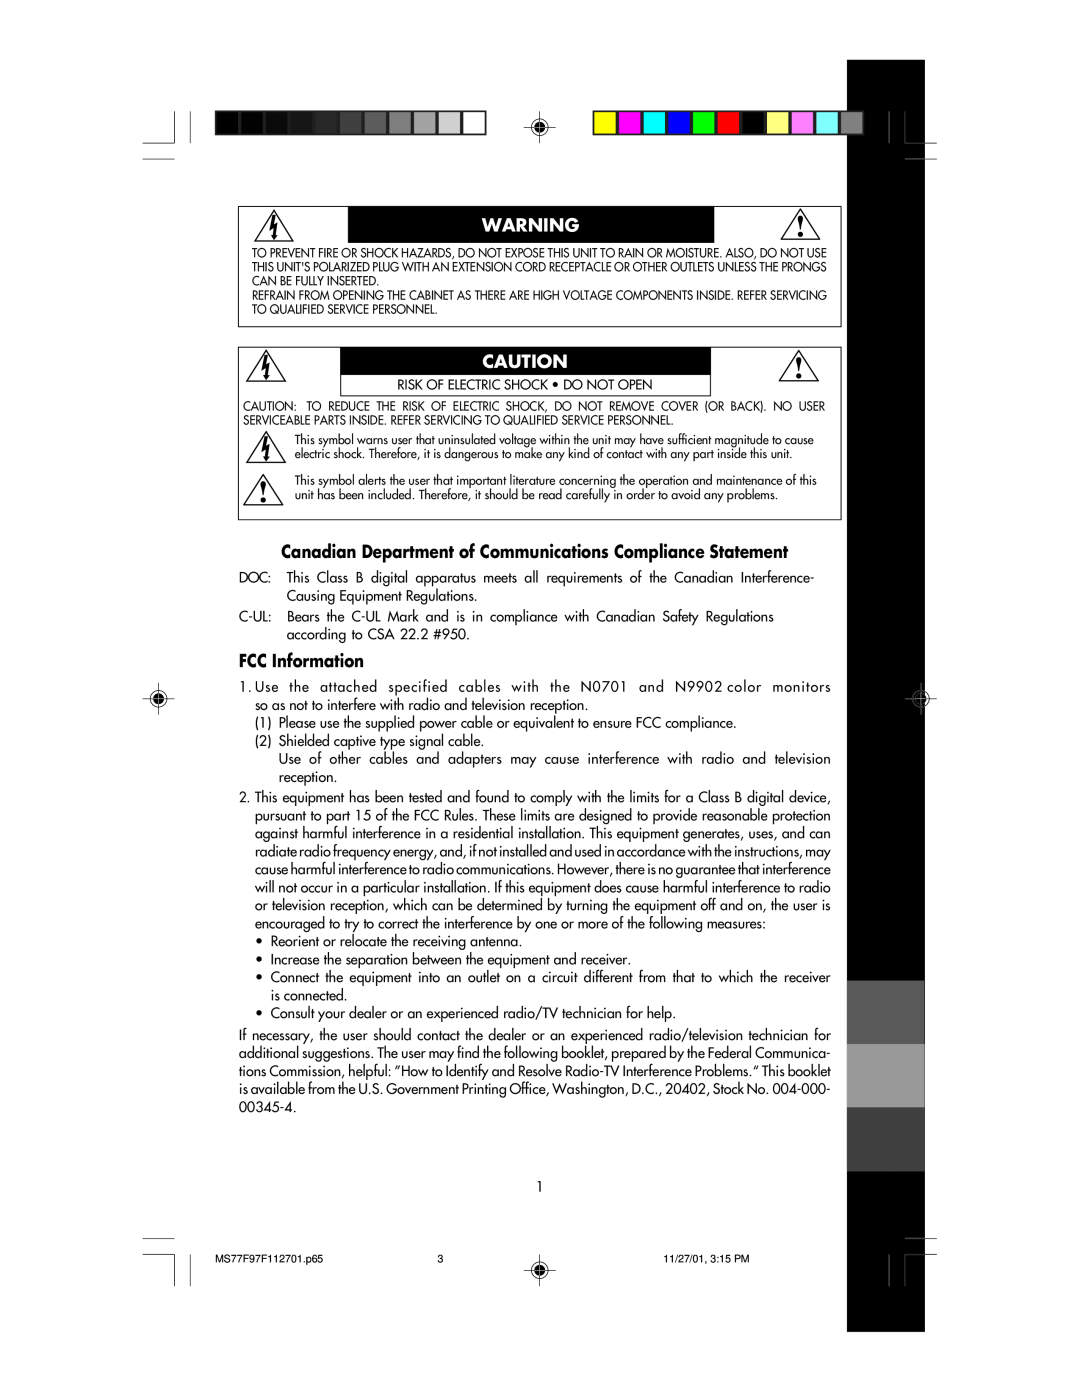 NEC 77F, 97F manual Canadian Department of Communications Compliance Statement, FCC Information 